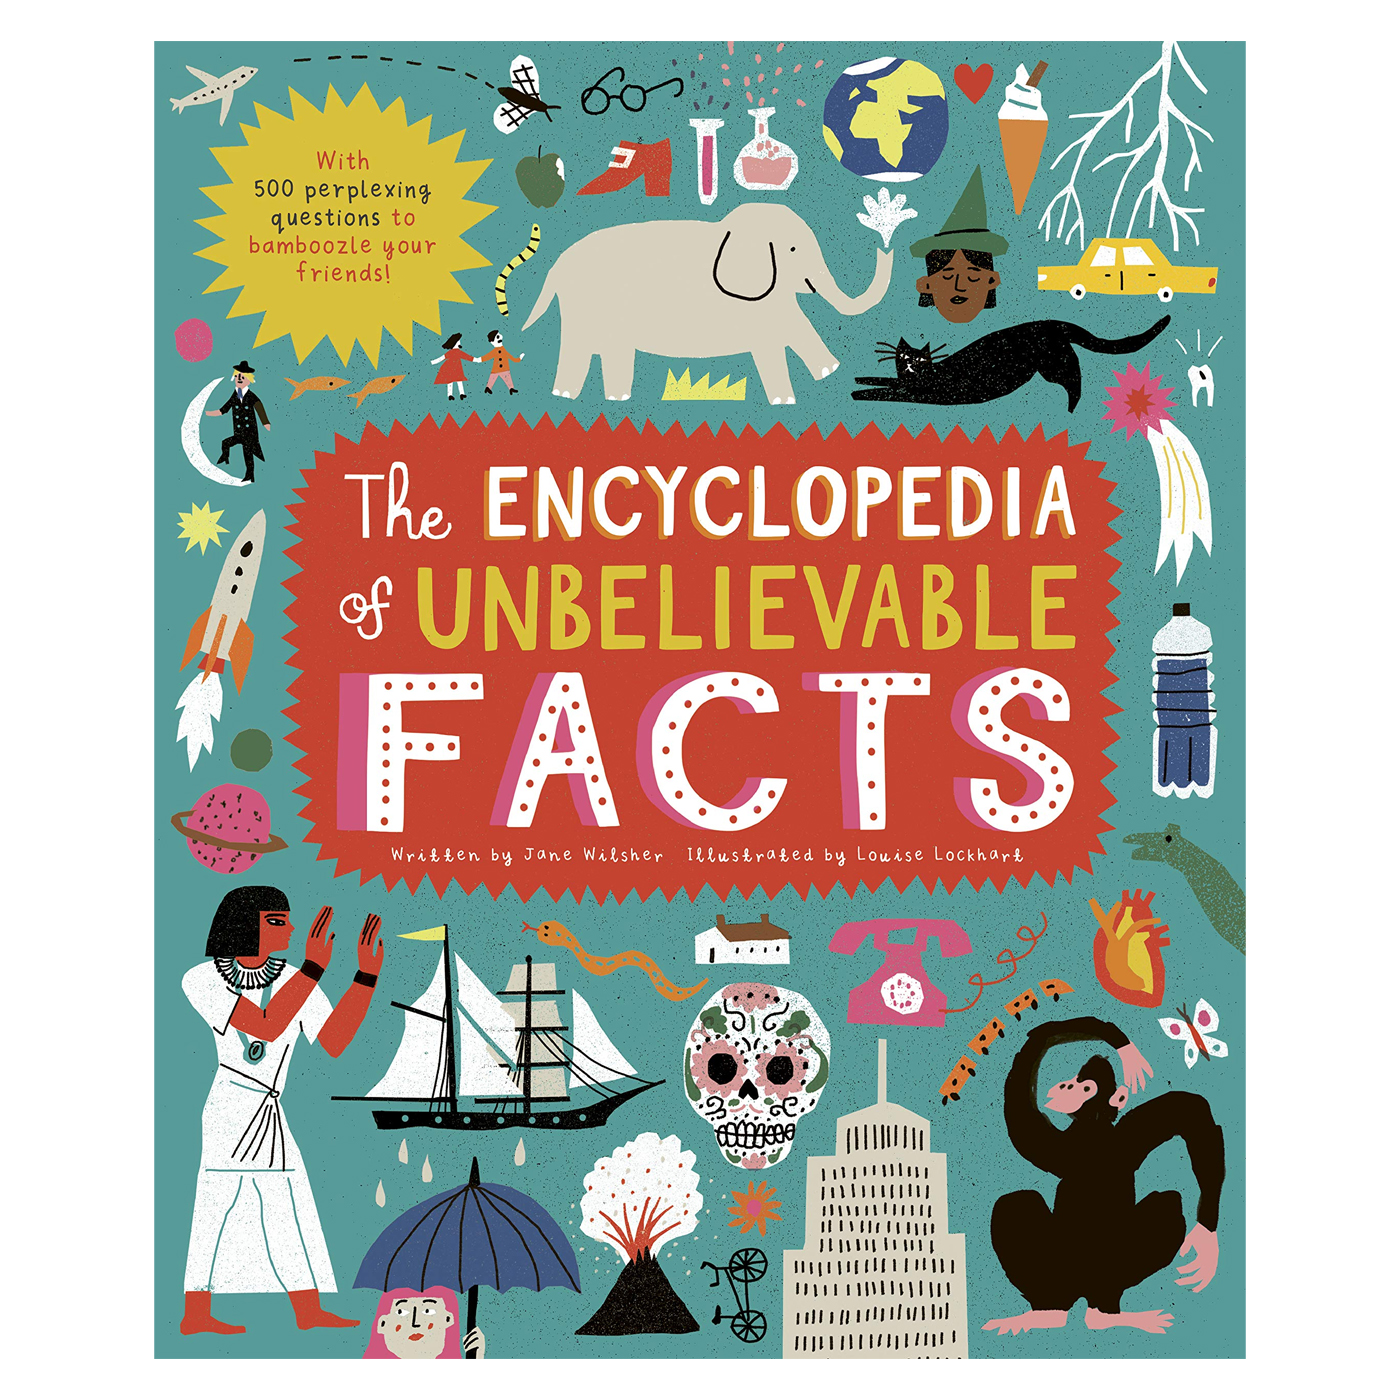  The Encyclopedia of Unbelievable Facts